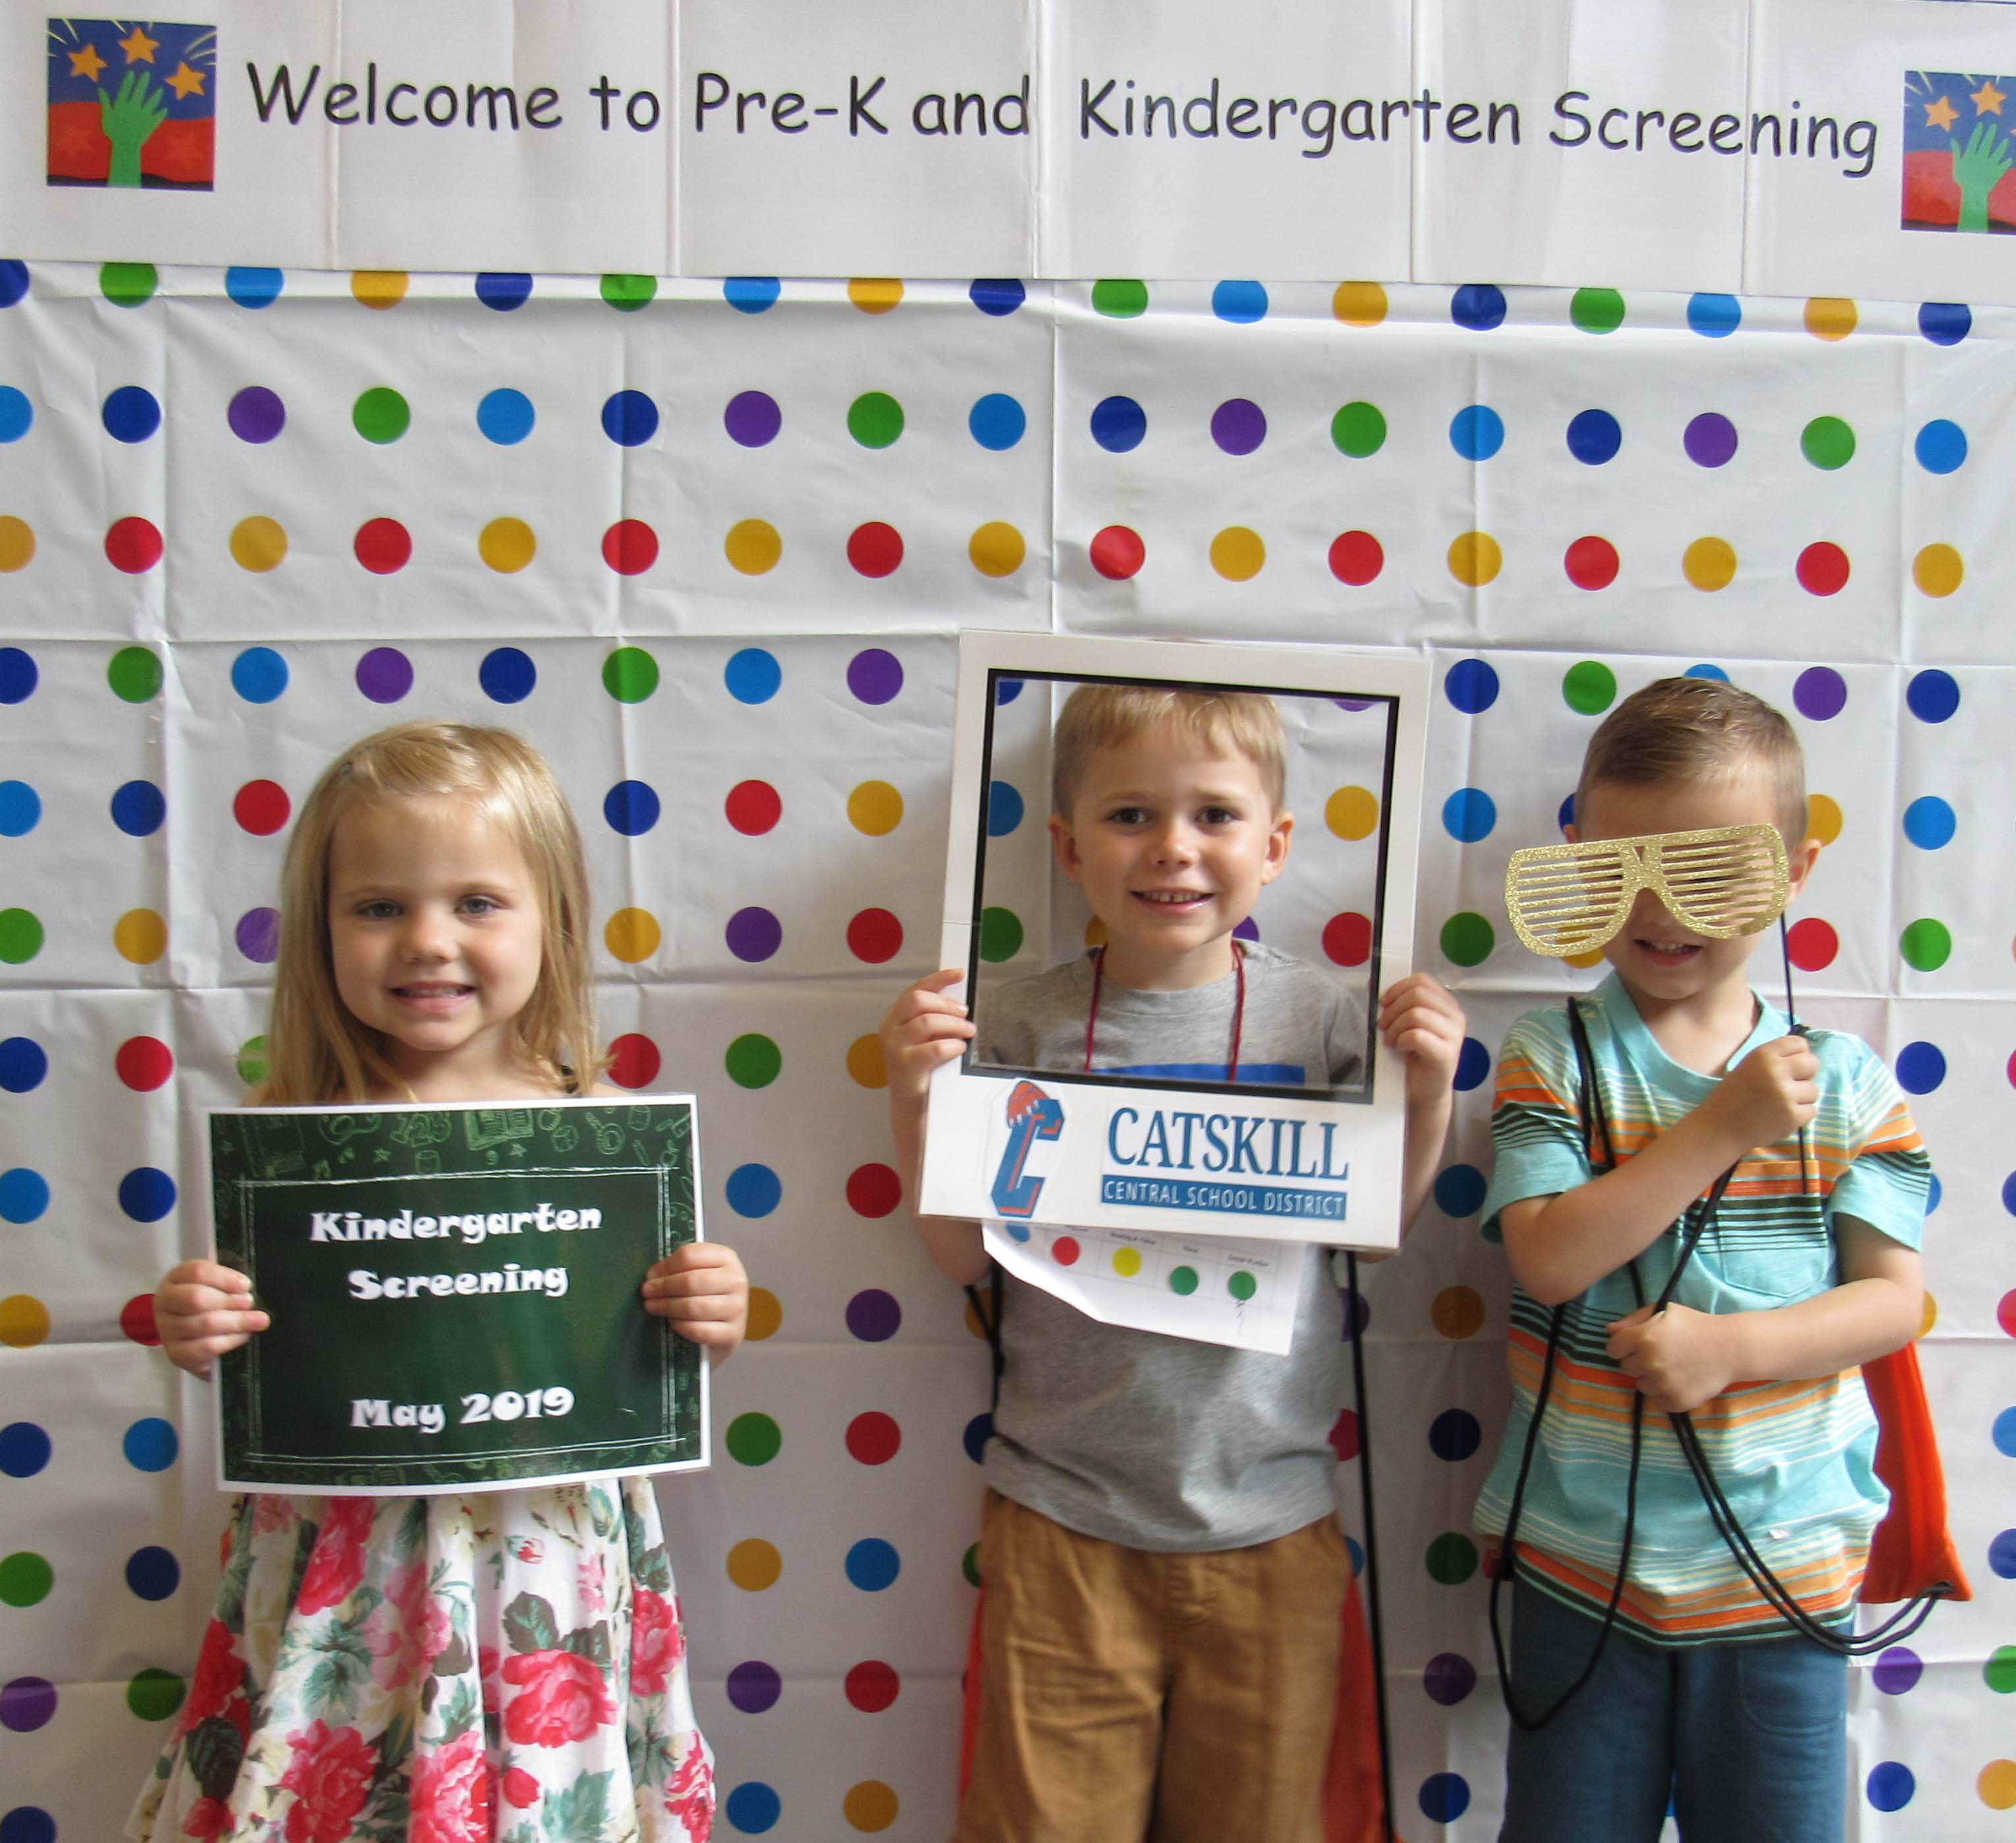 one girl and two boys pose with sign, frame, and silly glasses